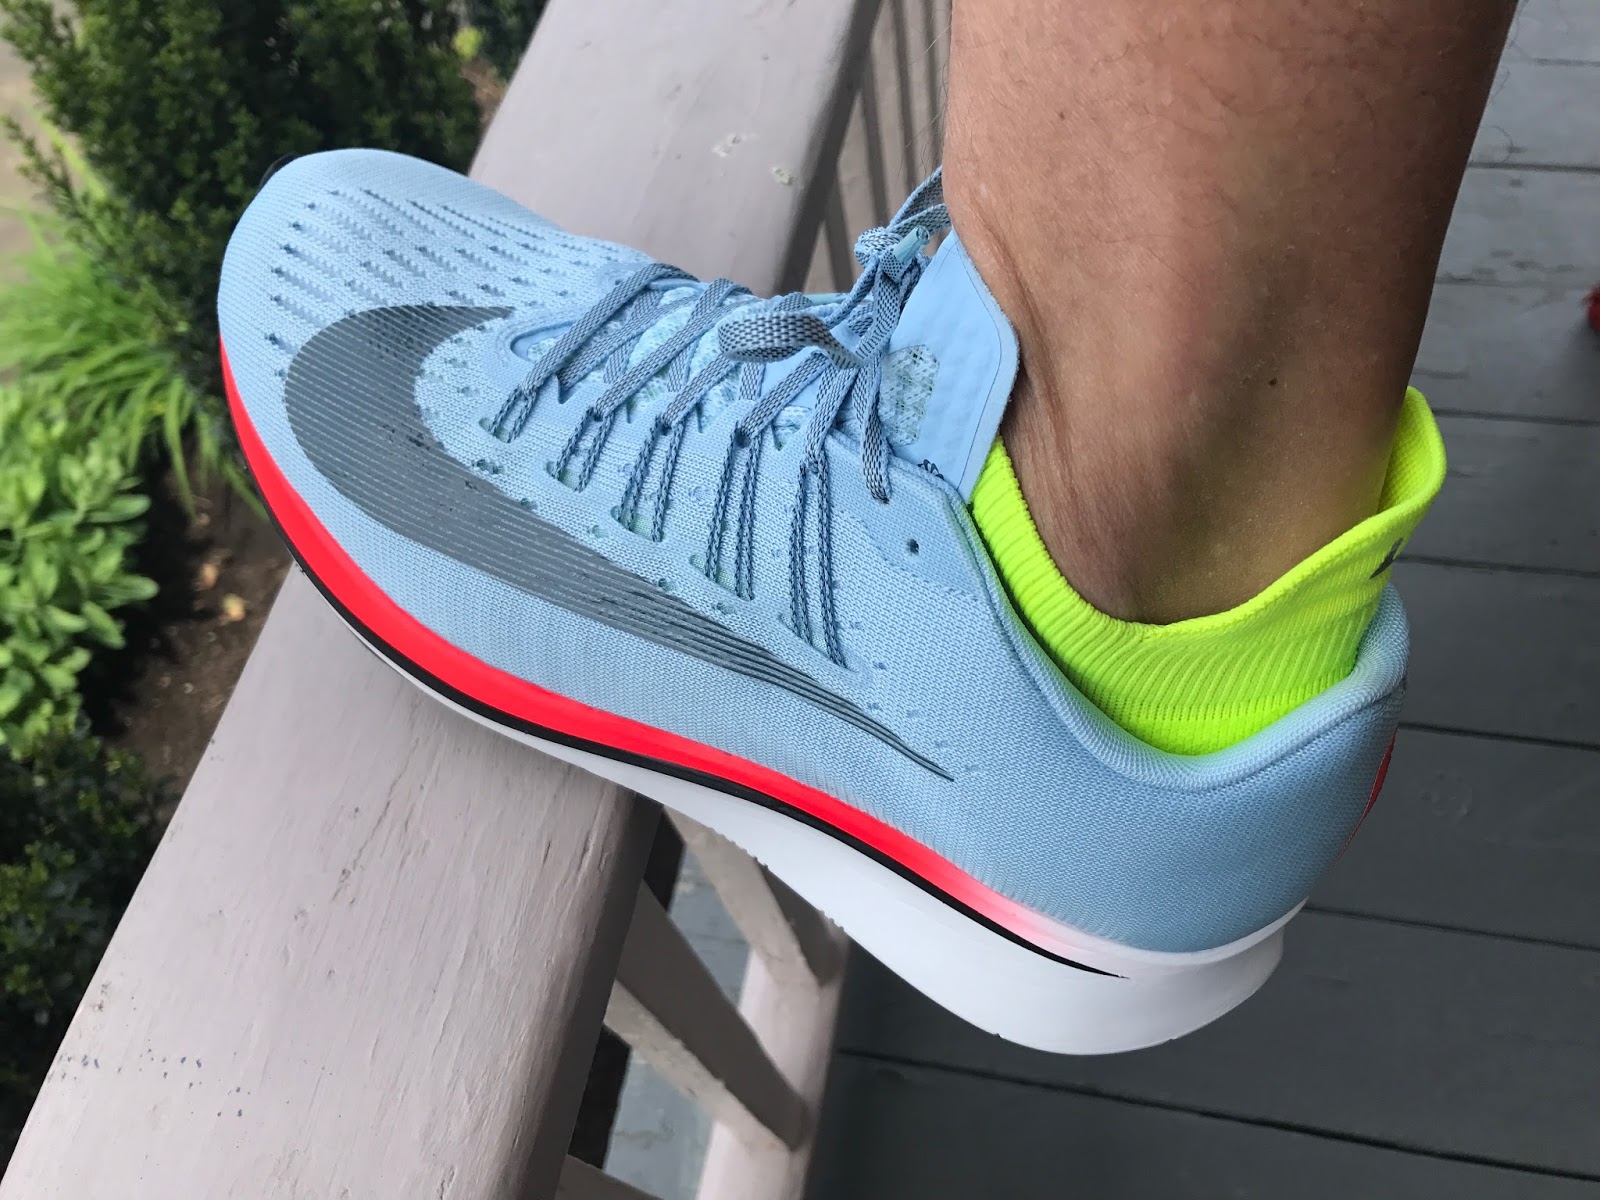 Offer Hurry up Accompany Road Trail Run: Nike Zoom Fly Flyknit Initial Road Test Review: Zoom Fly  2.5%?